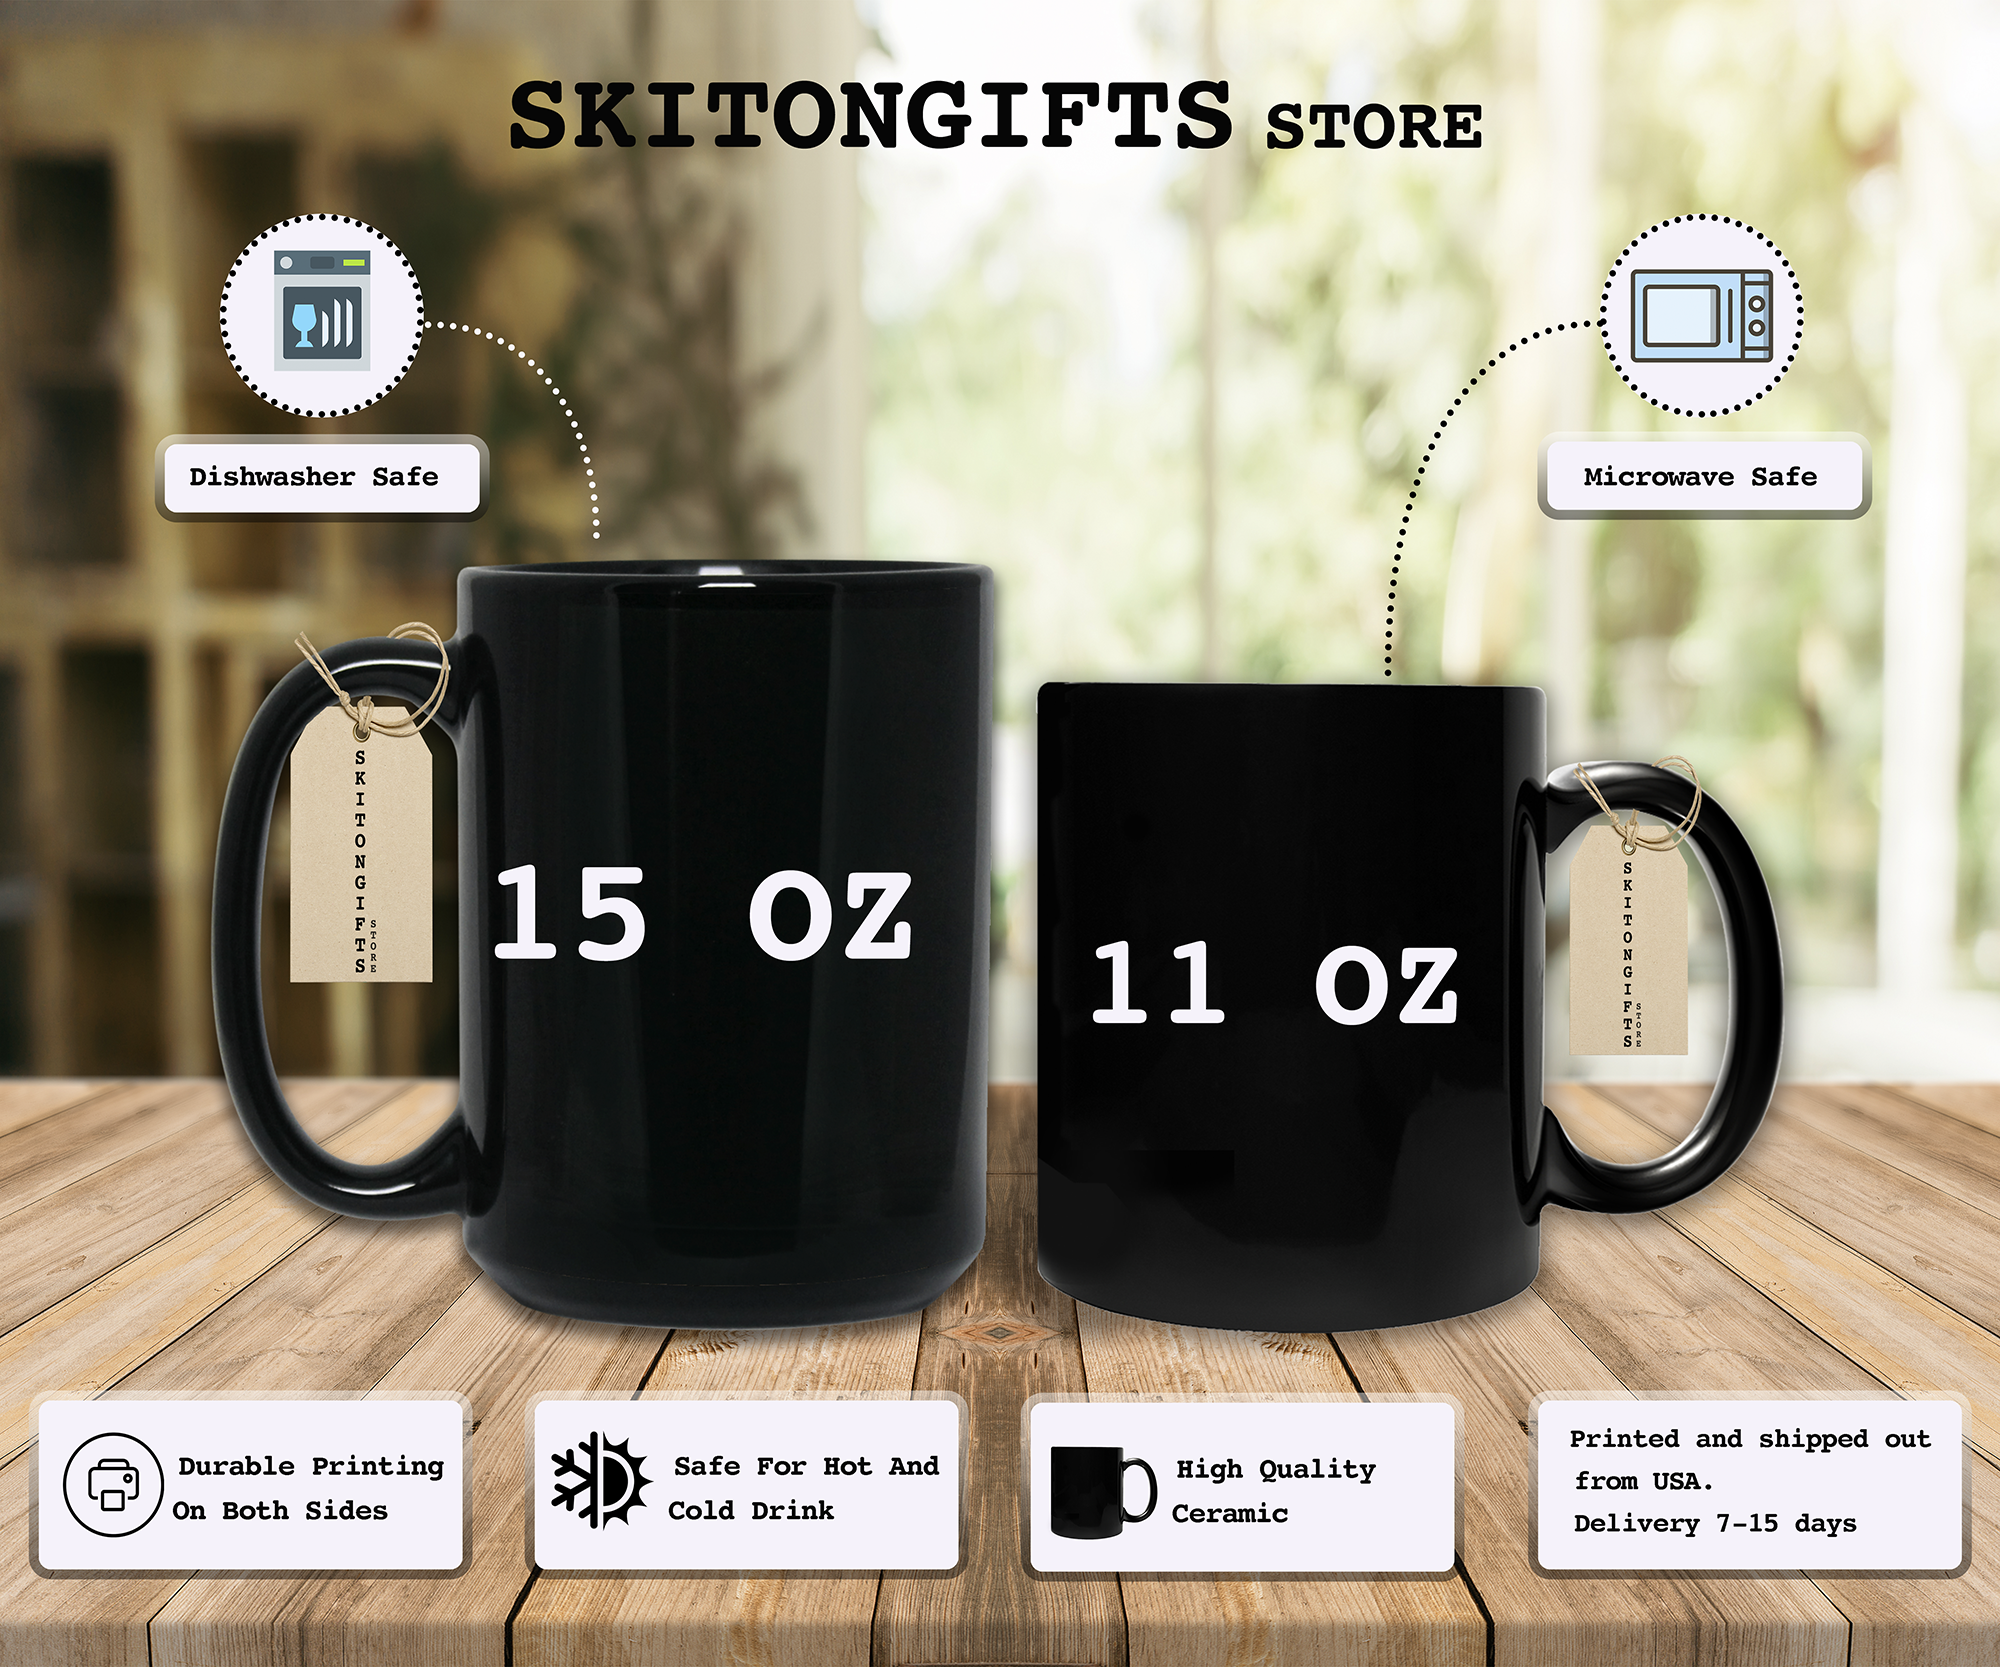 Skitongifts Funny Ceramic Novelty Coffee Mug Yoga Because Punching People Is Frowned Upon lVzOh9E